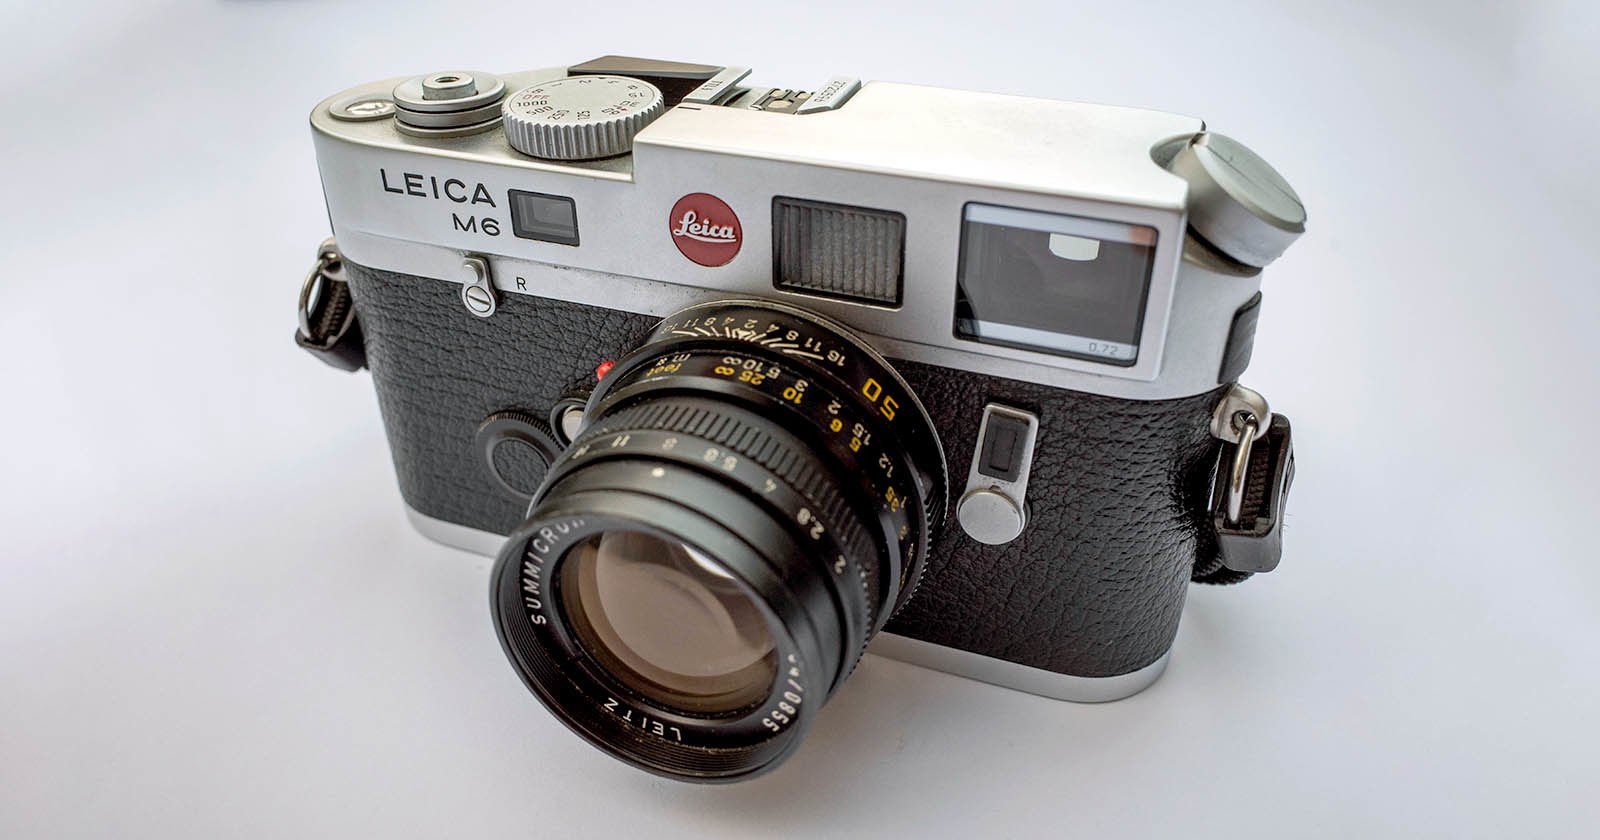  leica one best 35mm film cameras all 